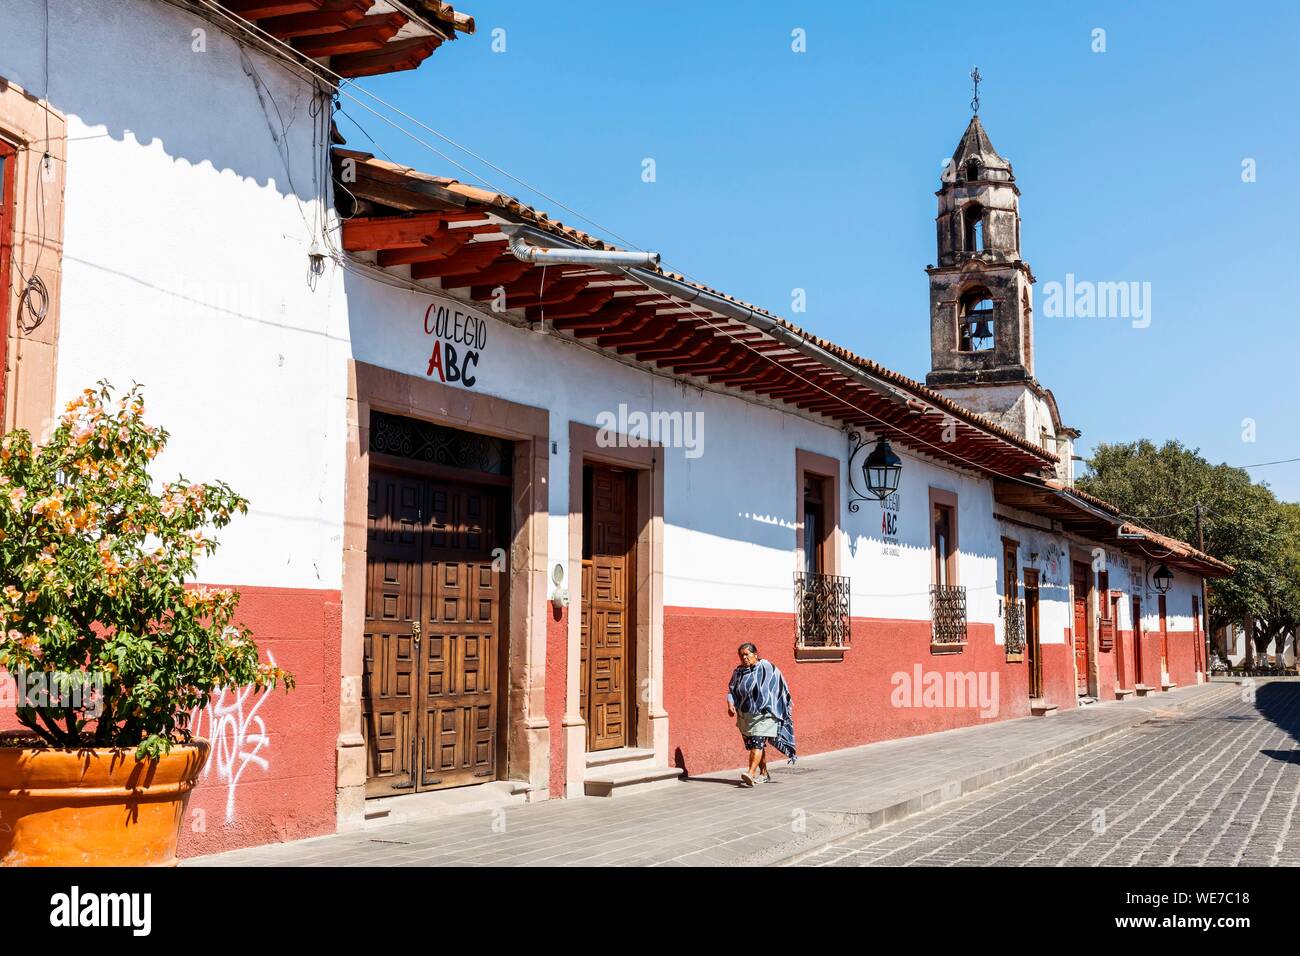 Mexico, Michoacan state, Patzcuaro, typical street with colonial houses and San Juan de Dios clock tower Stock Photo